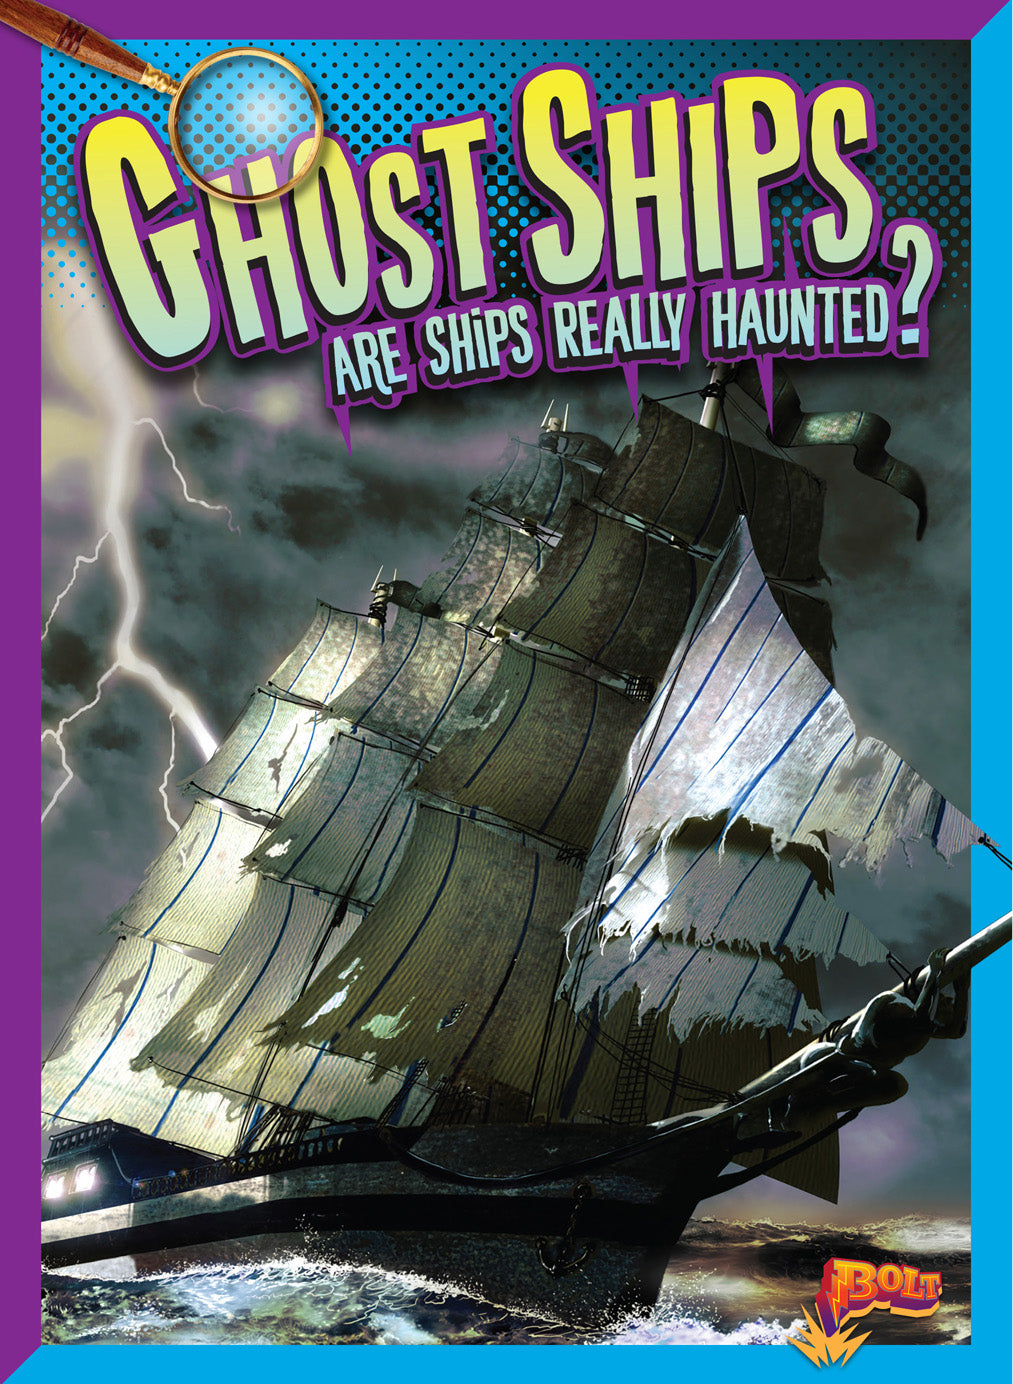 History's Mysteries: Ghost Ships: Are Ships Really Haunted?